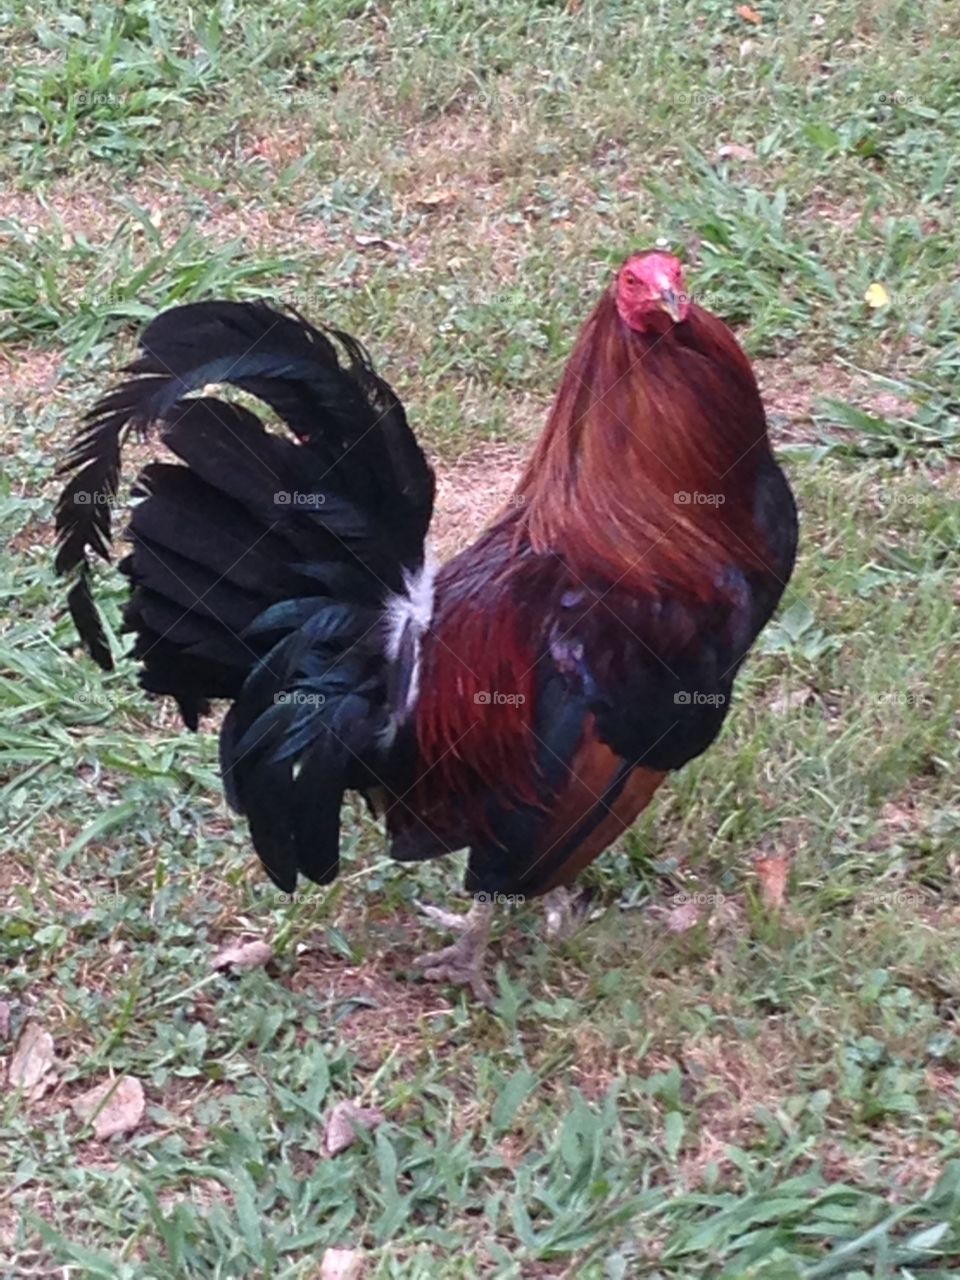 My pet rooster